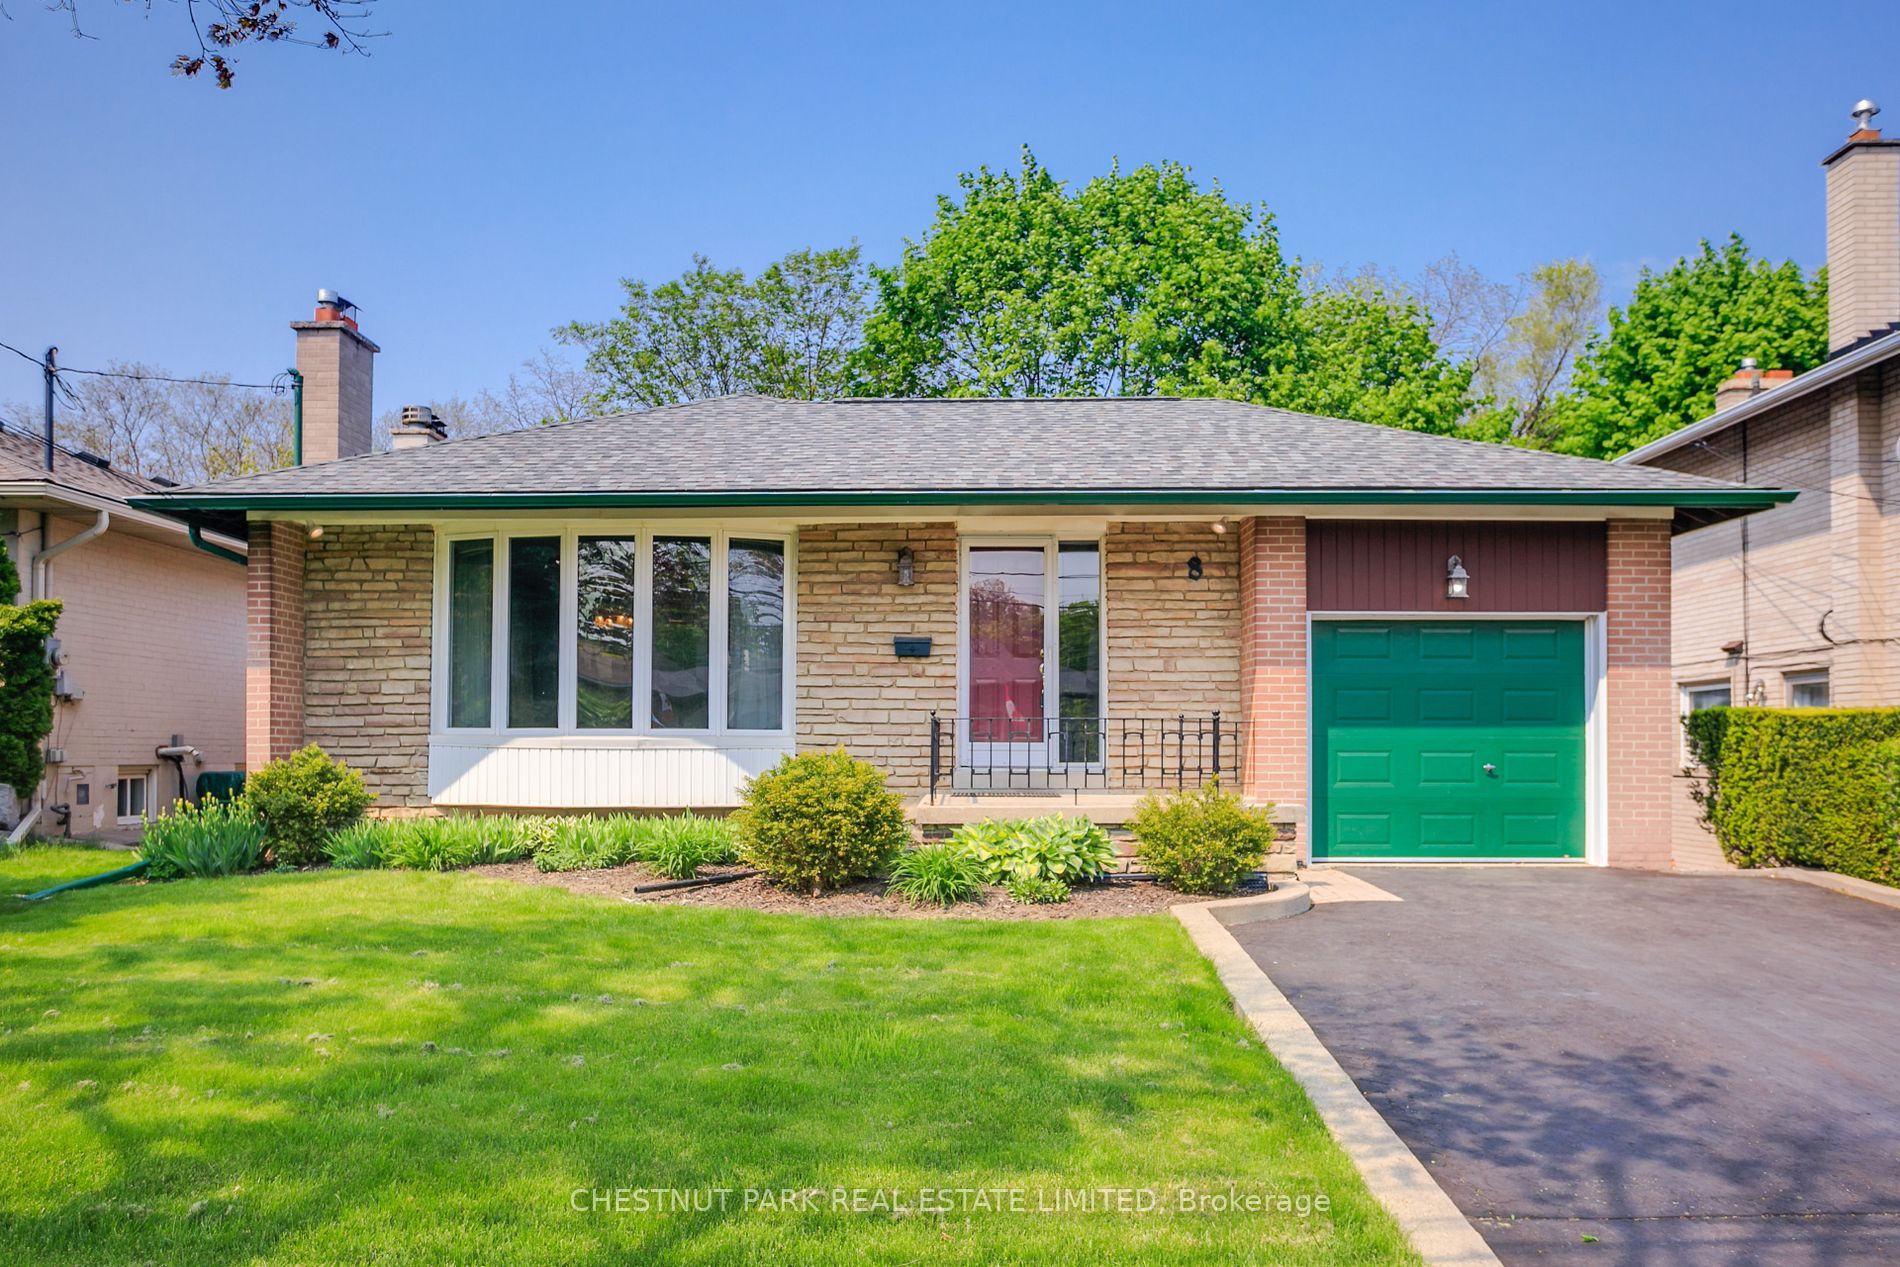 Main Photo: 8 Martinview Court in Toronto: Eringate-Centennial-West Deane House (Bungalow) for sale (Toronto W08)  : MLS®# W6026372